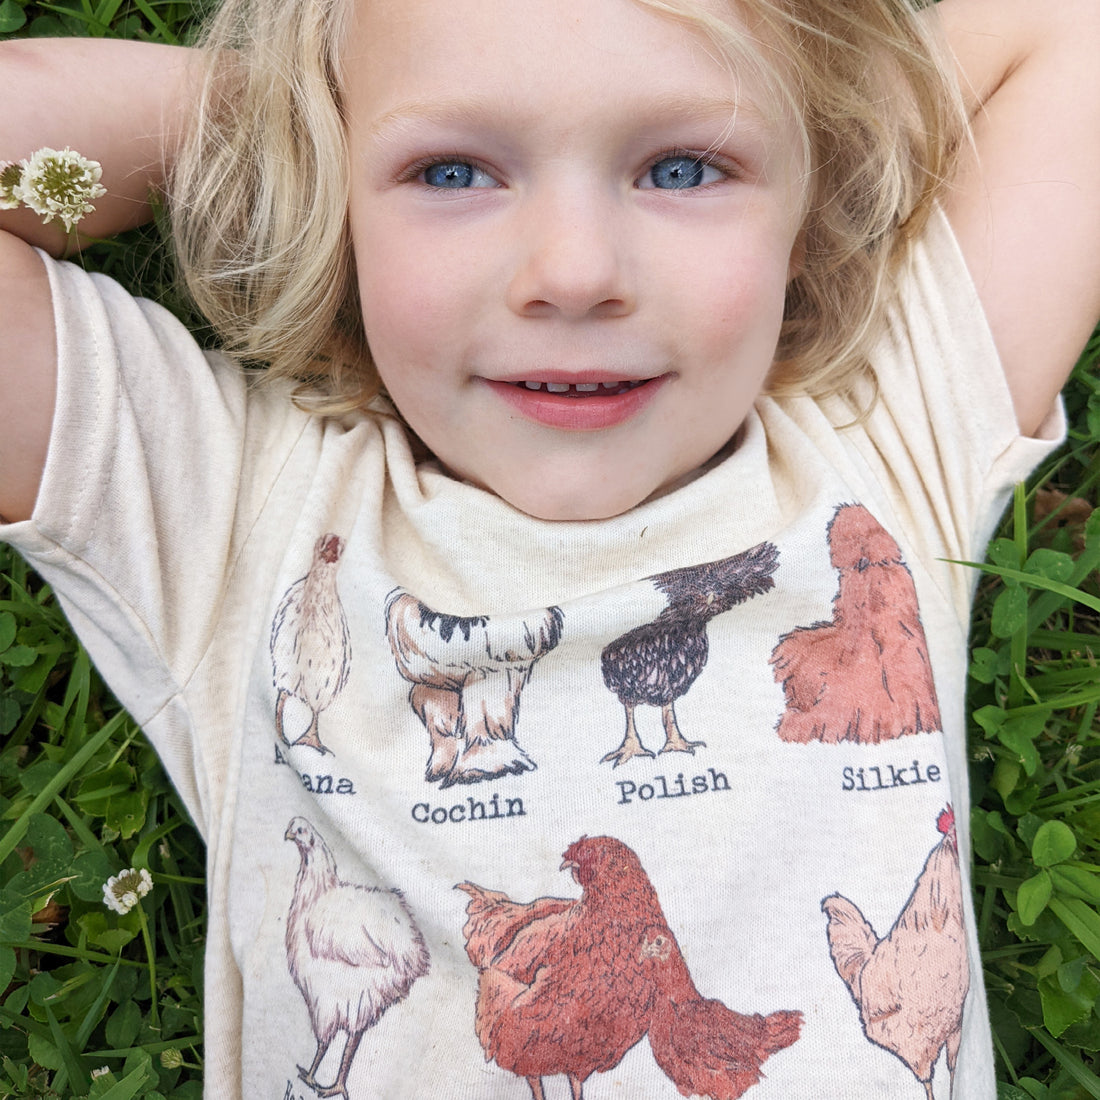 Cluckin' Excited: Introducing Barefoot Baby's Shirt of the Month!